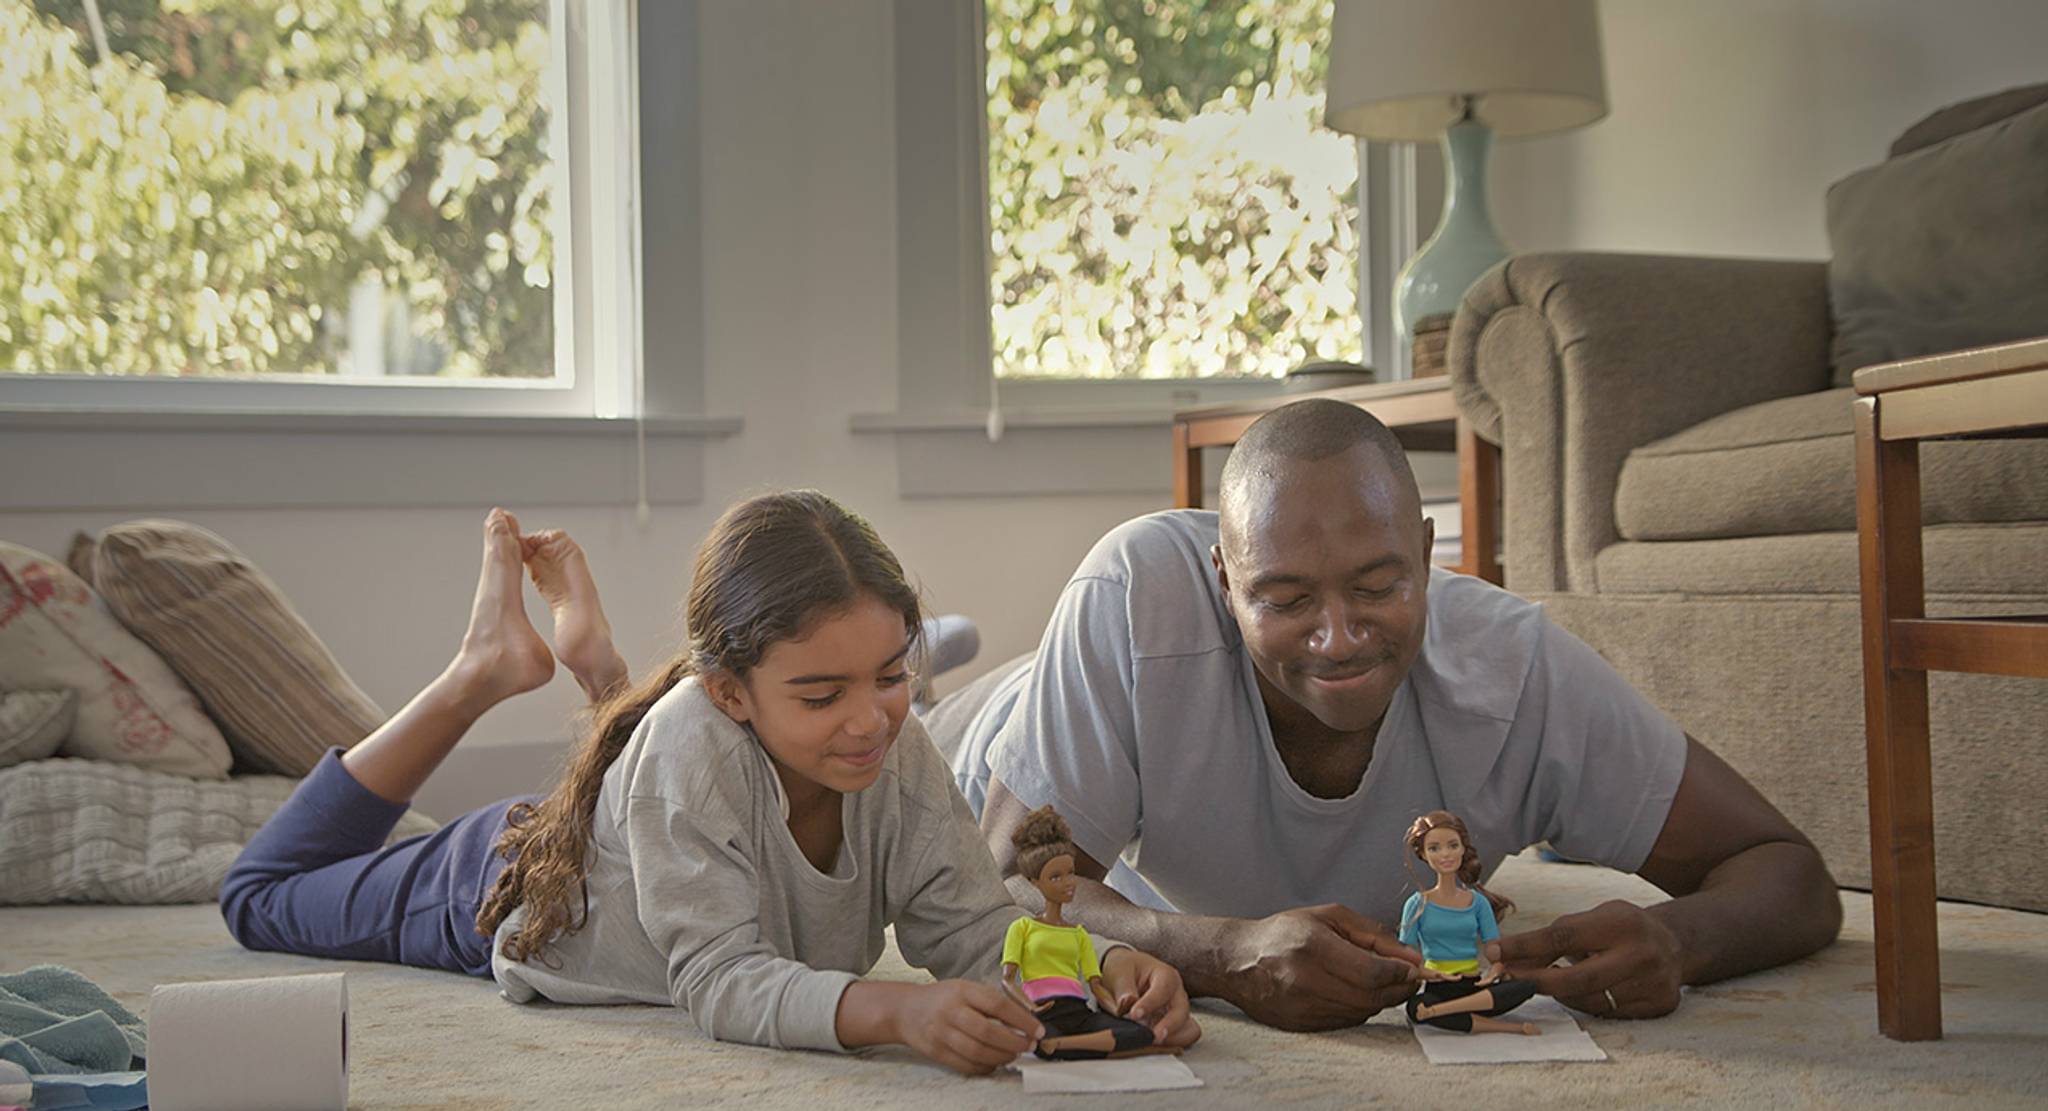 Mattel aired a Barbie ad for dads during the NFL